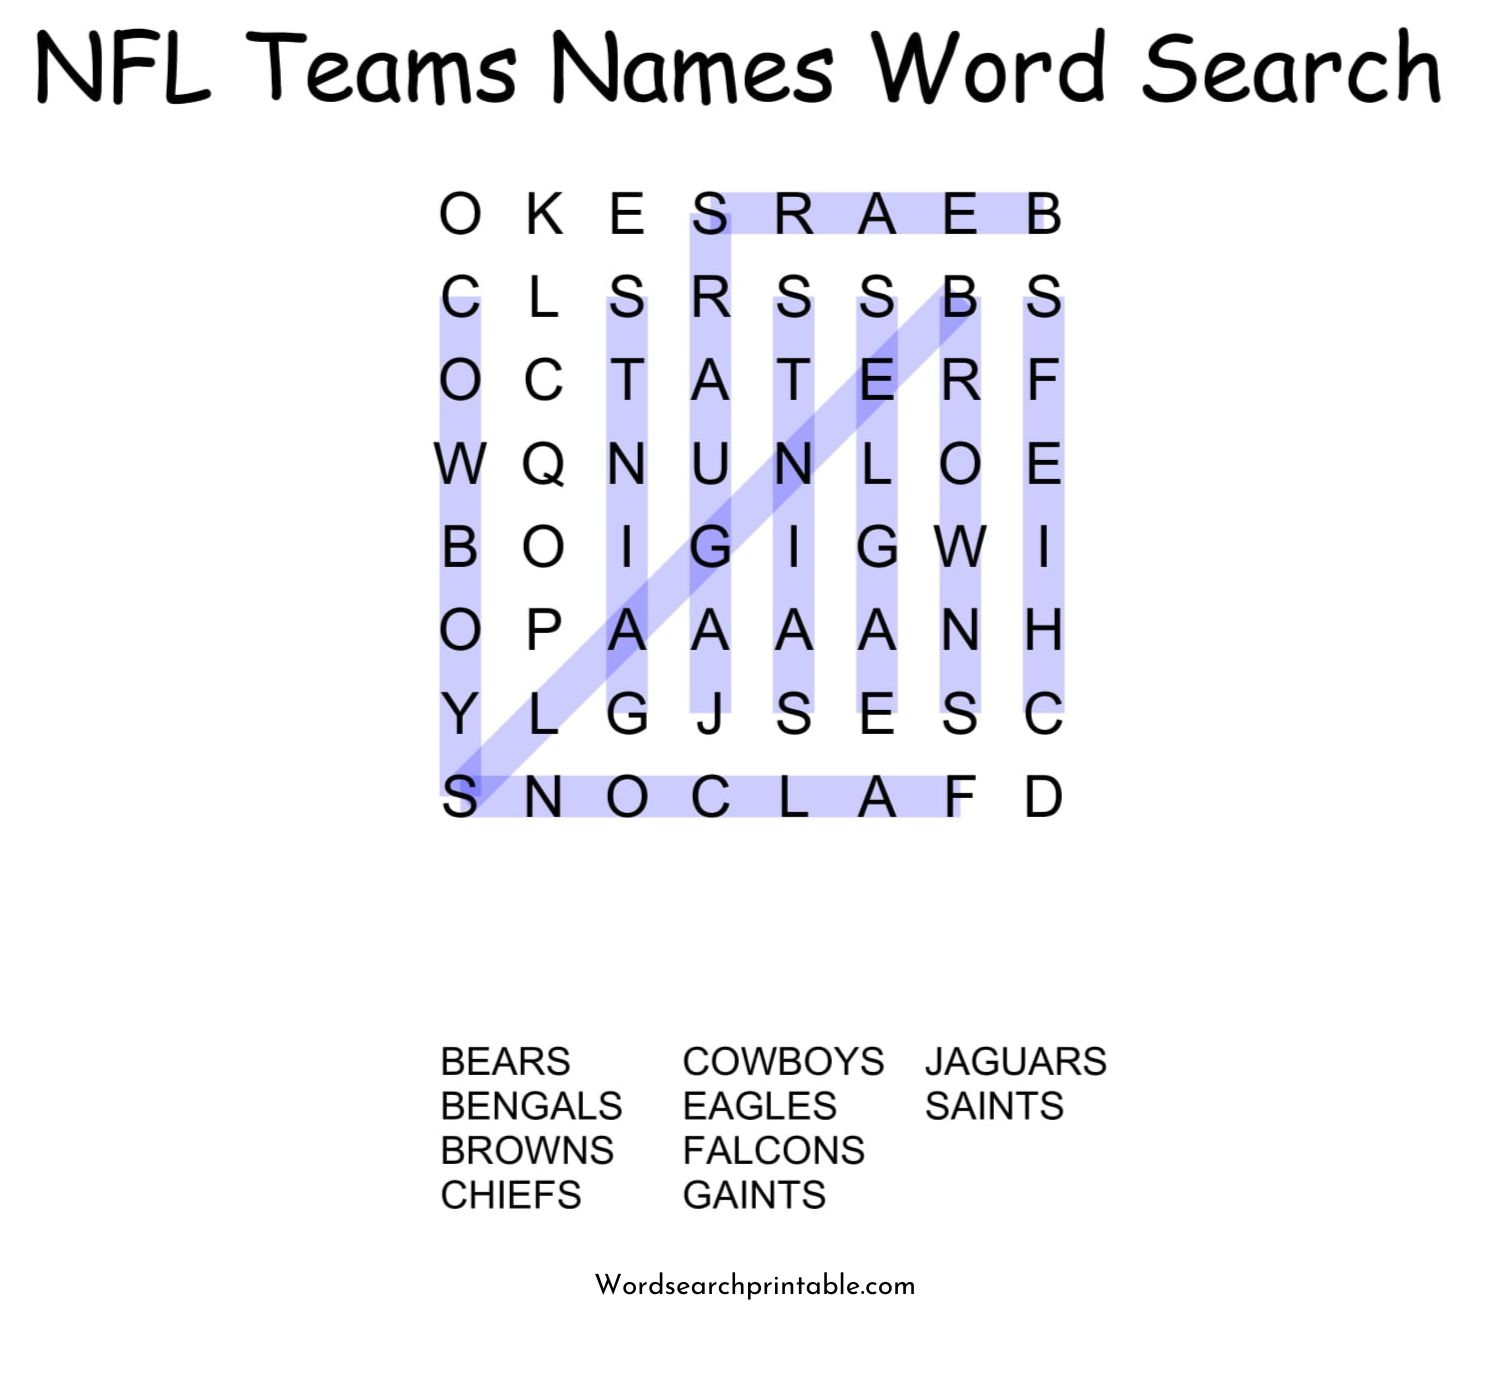 nfl teams names word search puzzle solution